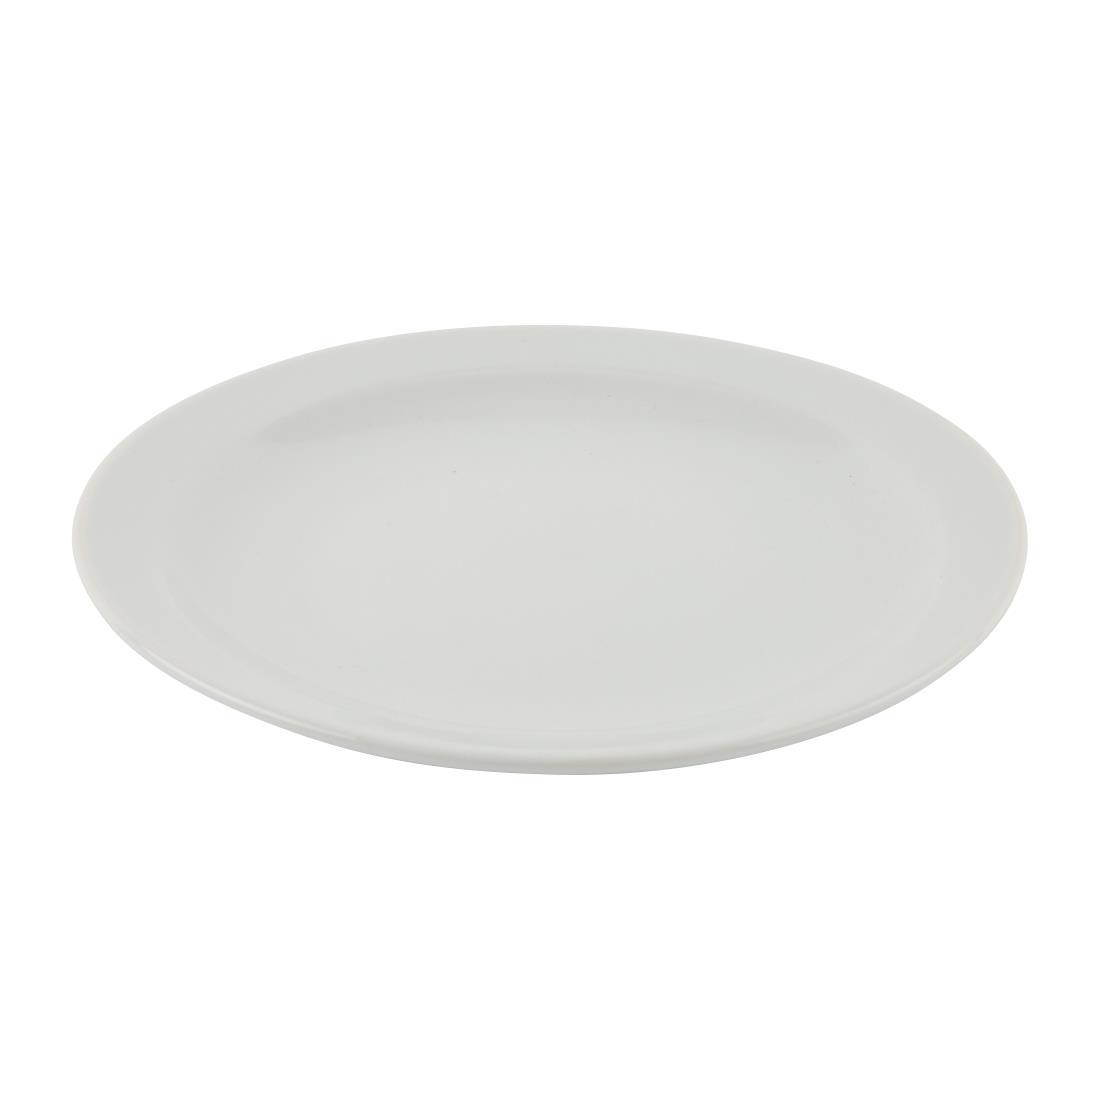 Olympia Athena Narrow Rimmed Plates 205mm (Pack of 12) - CF362  - 5